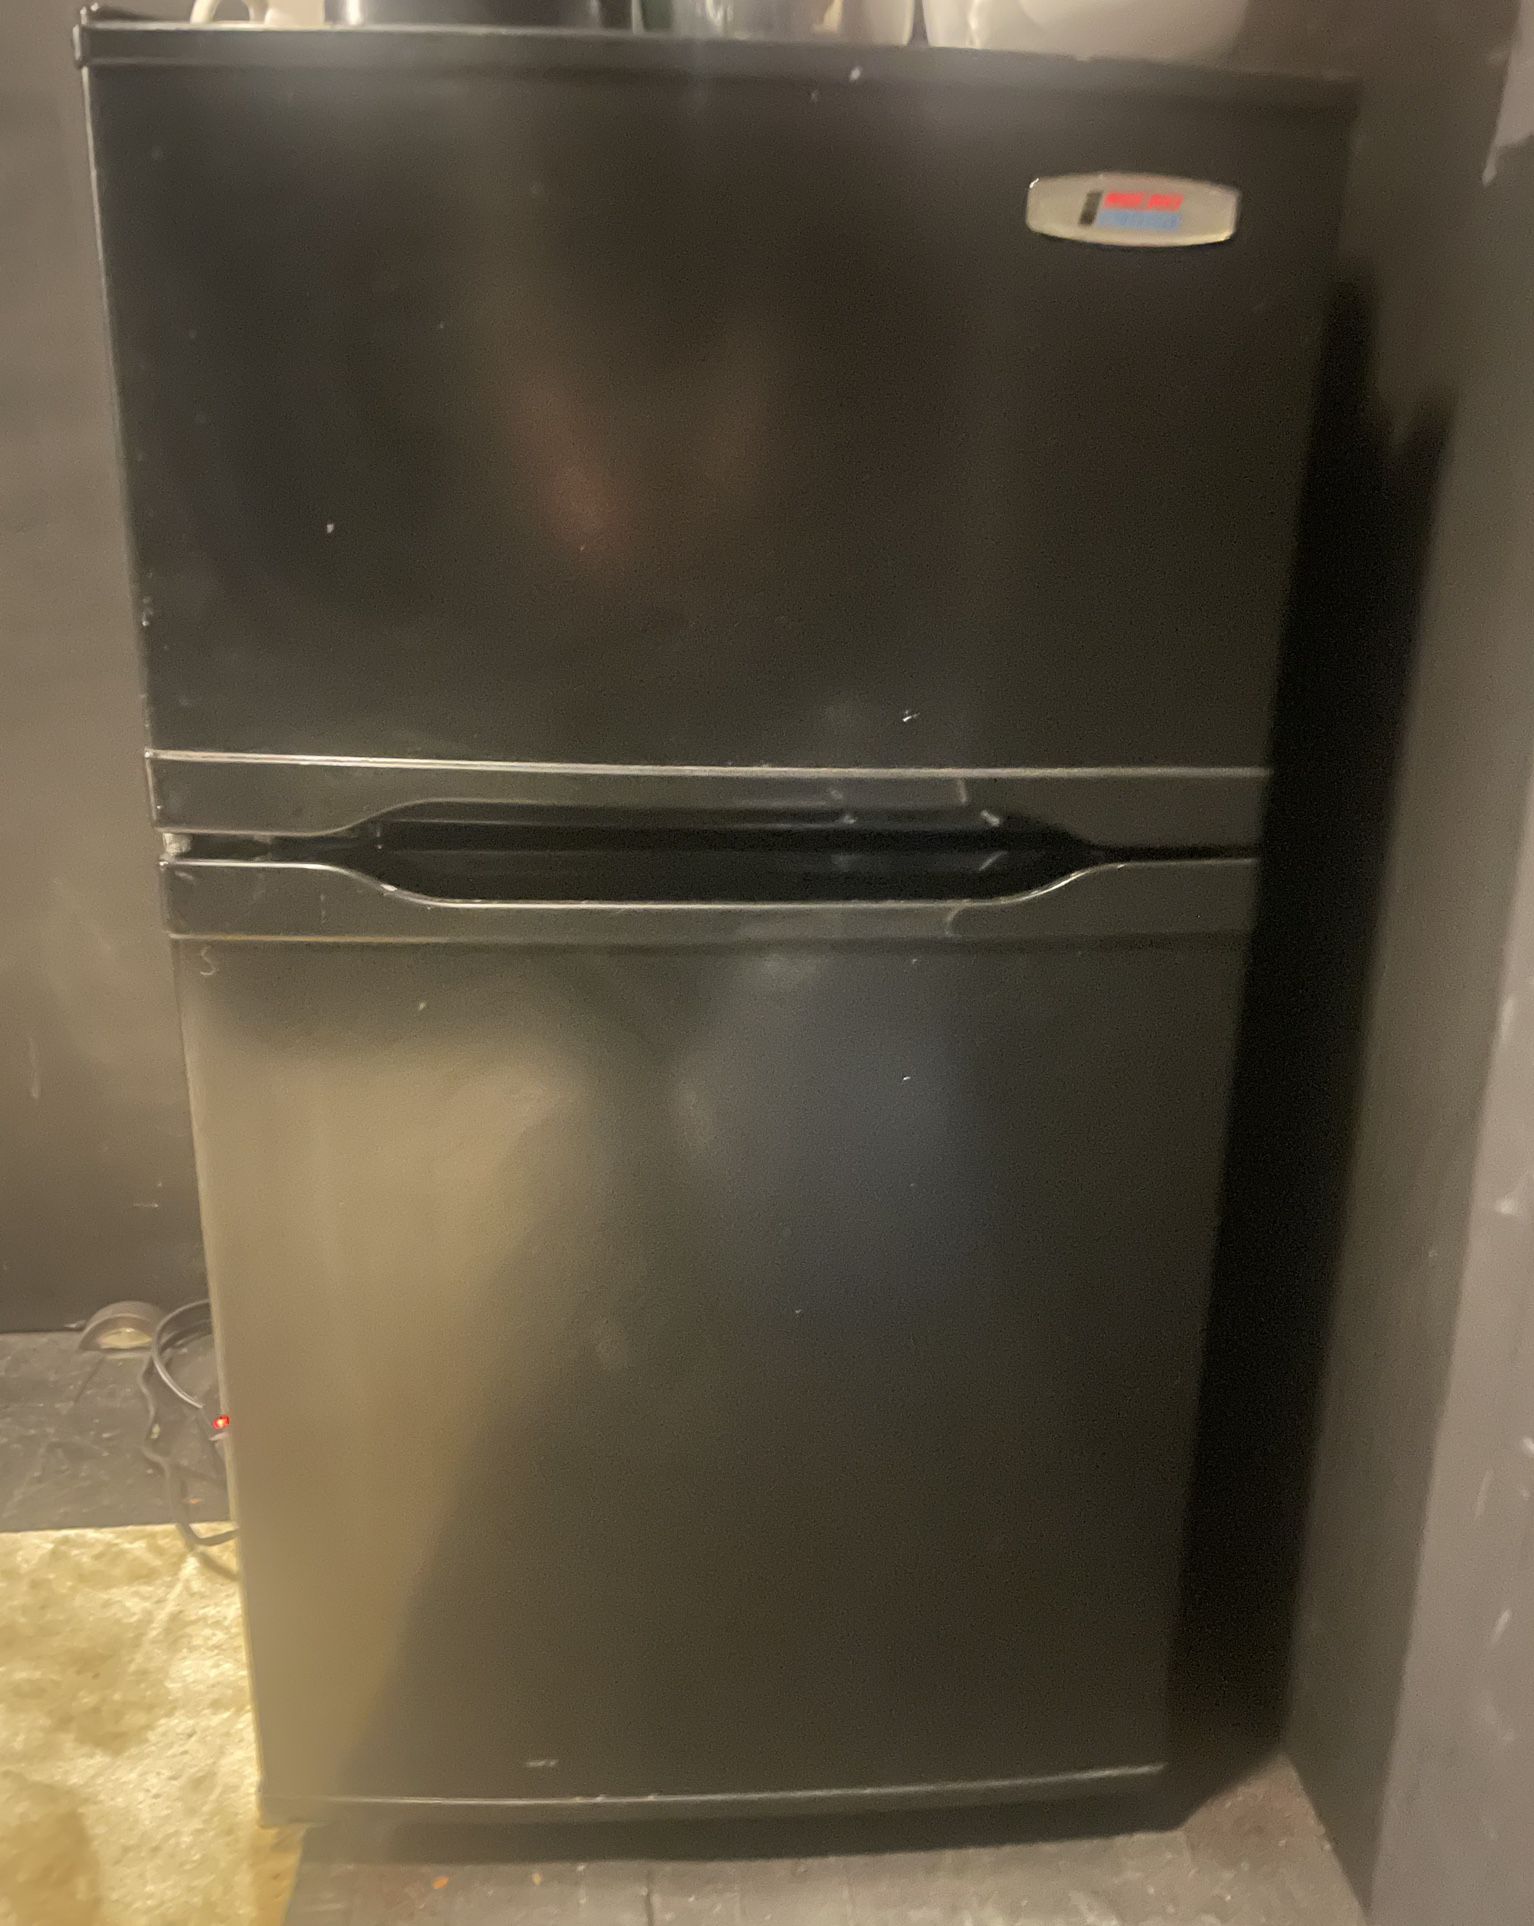 Mini Fridge With Freezer By Micro fridge Need To Get Rid Of For Space! Hollywood  $15